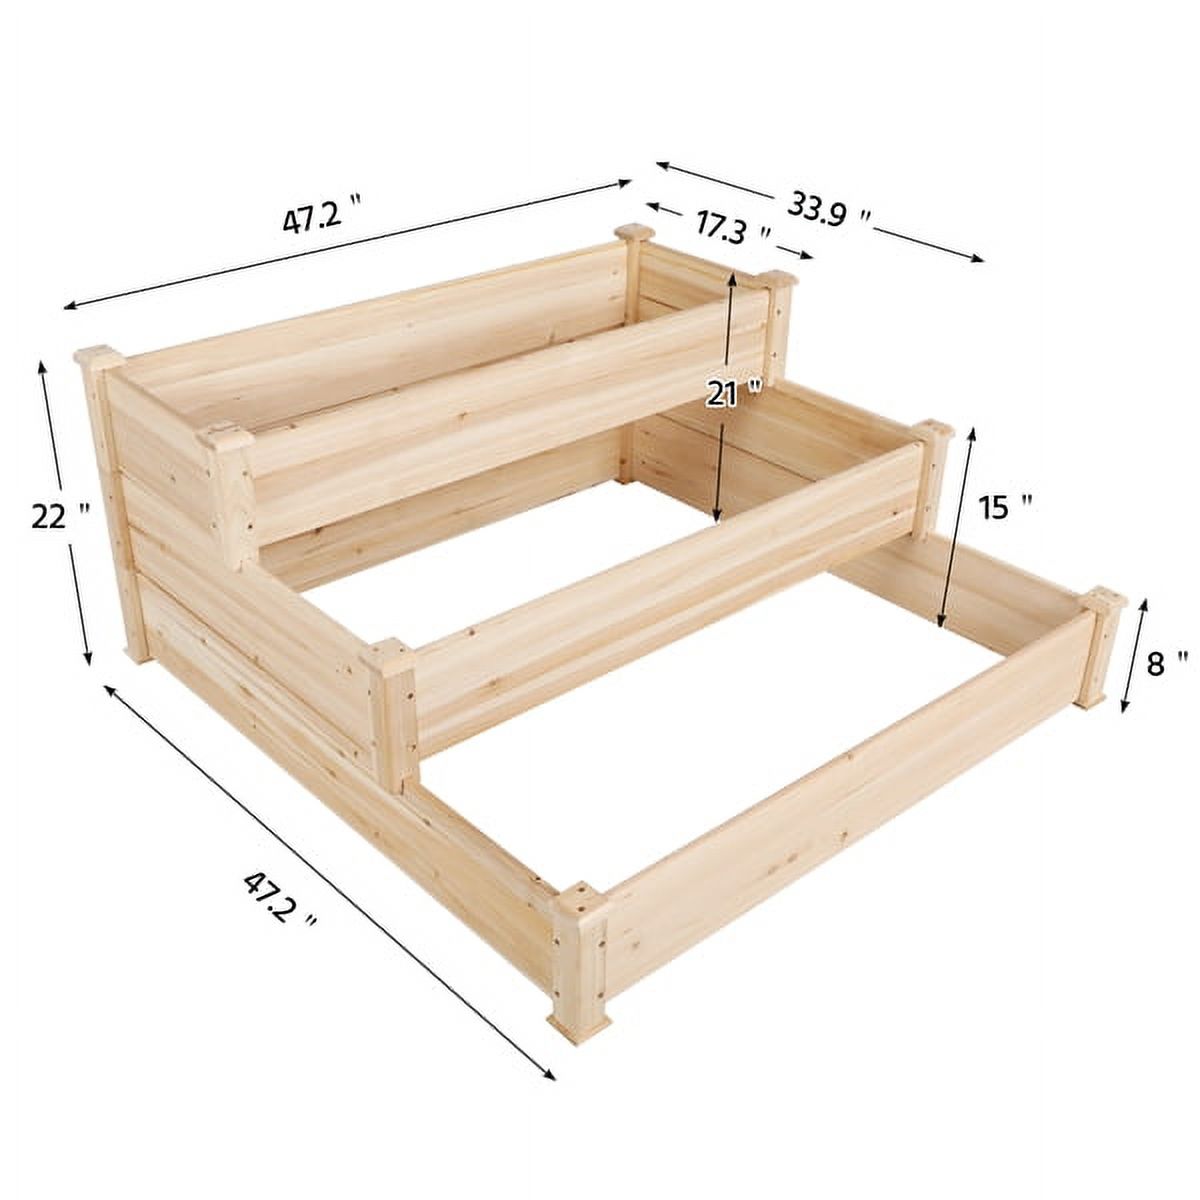 3 Tier Wood Raised Garden Bed Wood Elevated Flowers Vegetables Planter - image 3 of 14